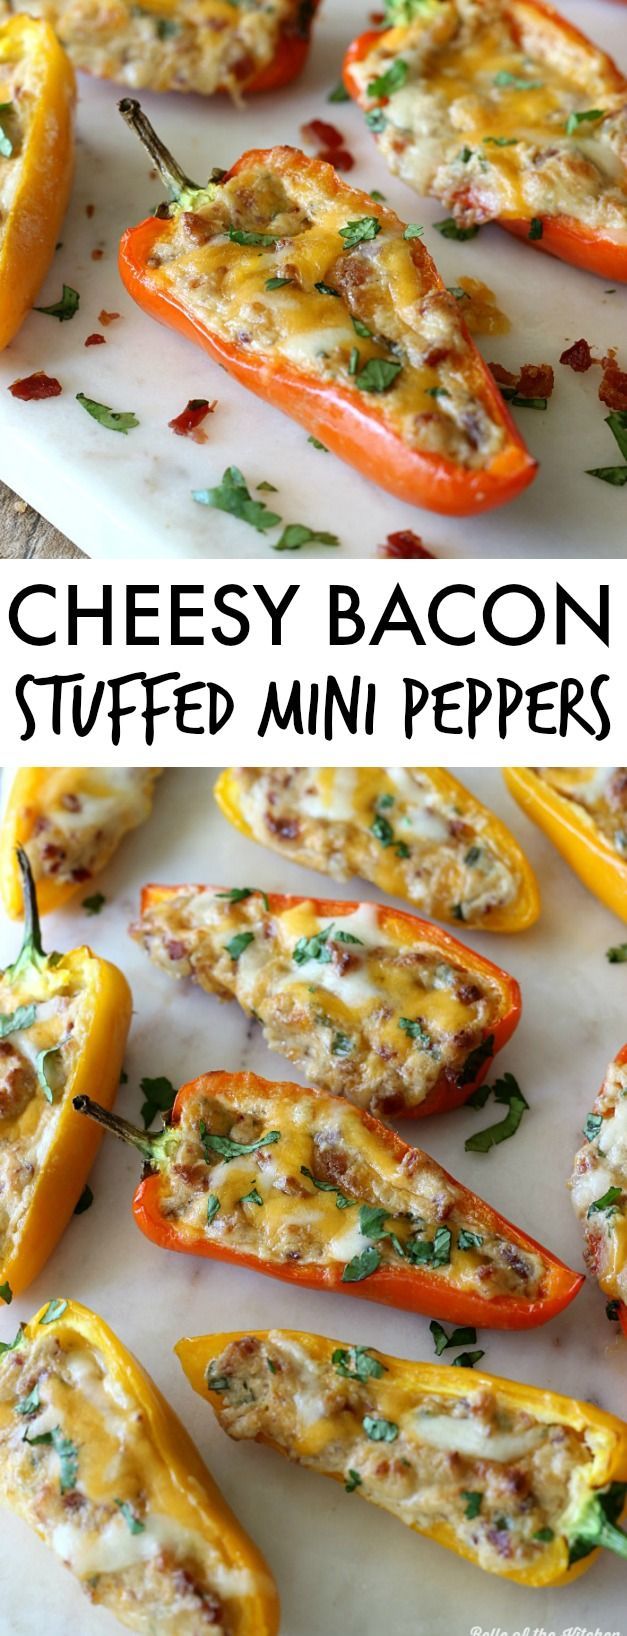 Every time I make these Cheesy Bacon Stuffed Mini Peppers they disappear in minutes! Everyone loves them!